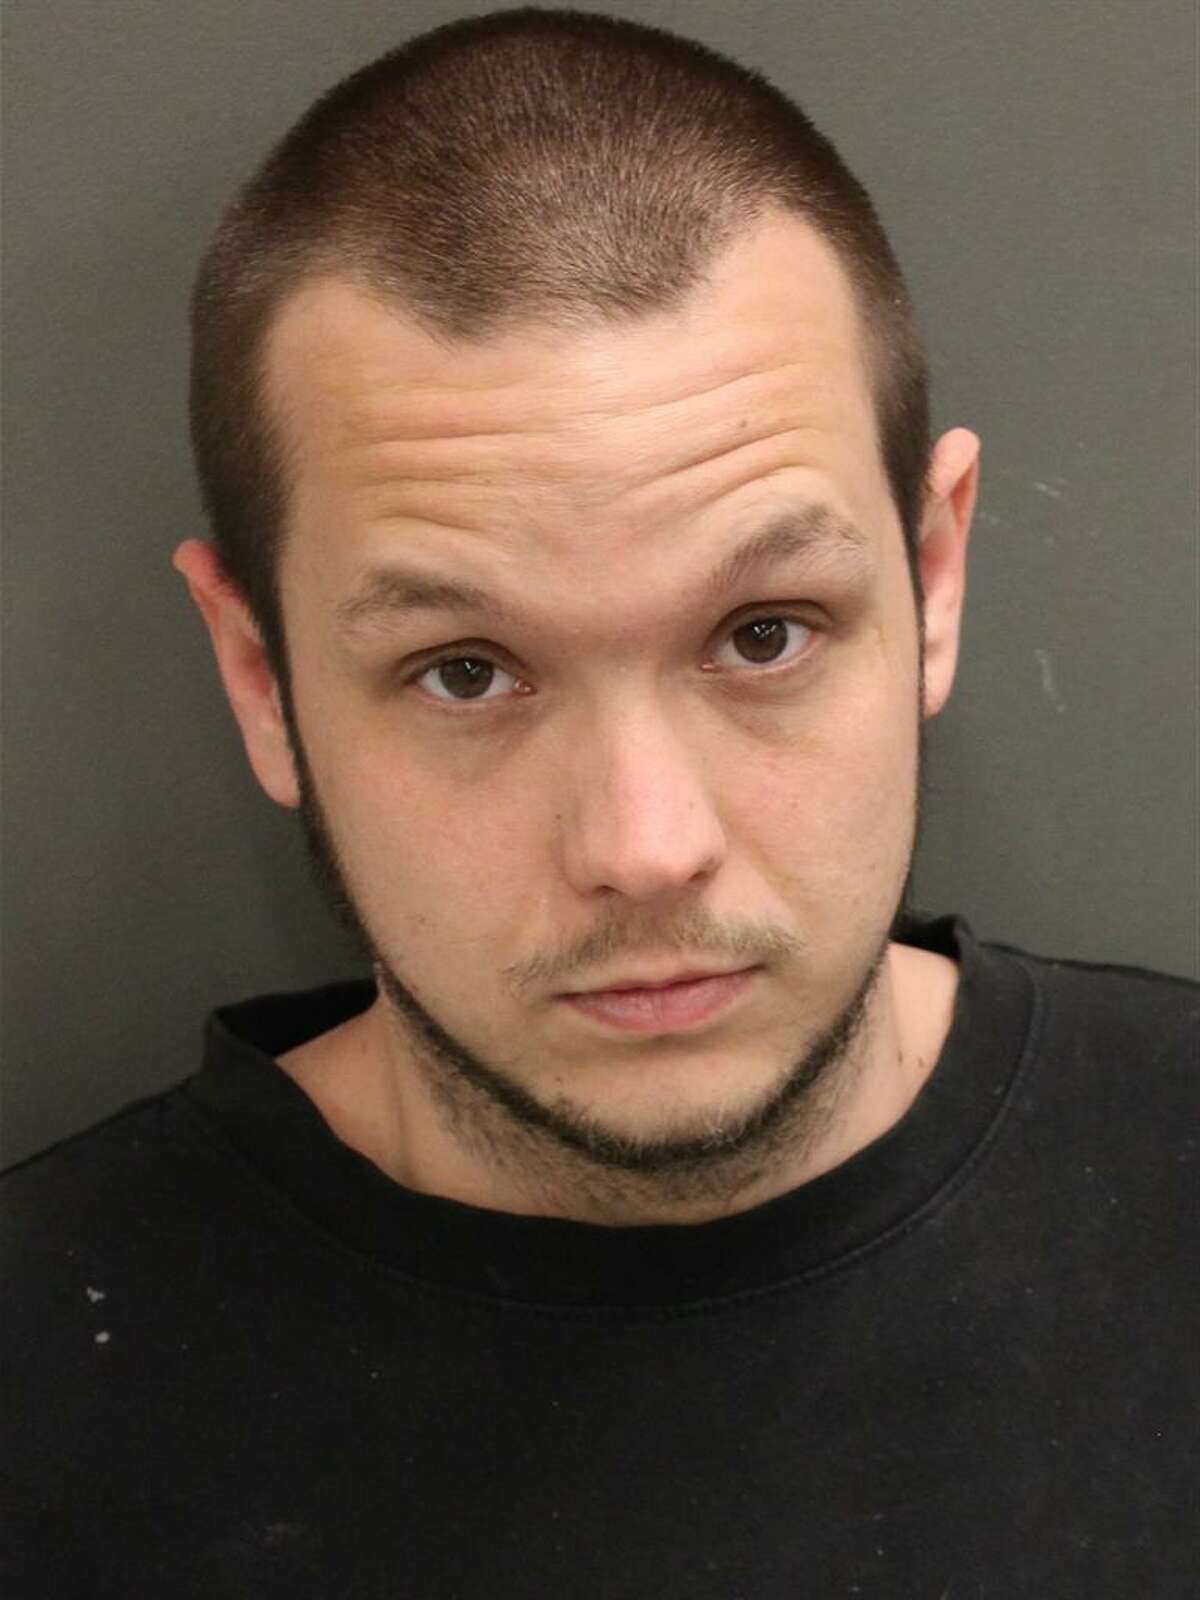 Richard Brown was charged with multiple child sex crimes after he allegedly lured a missing girl from San Antonio and forced sex on her for three nights.